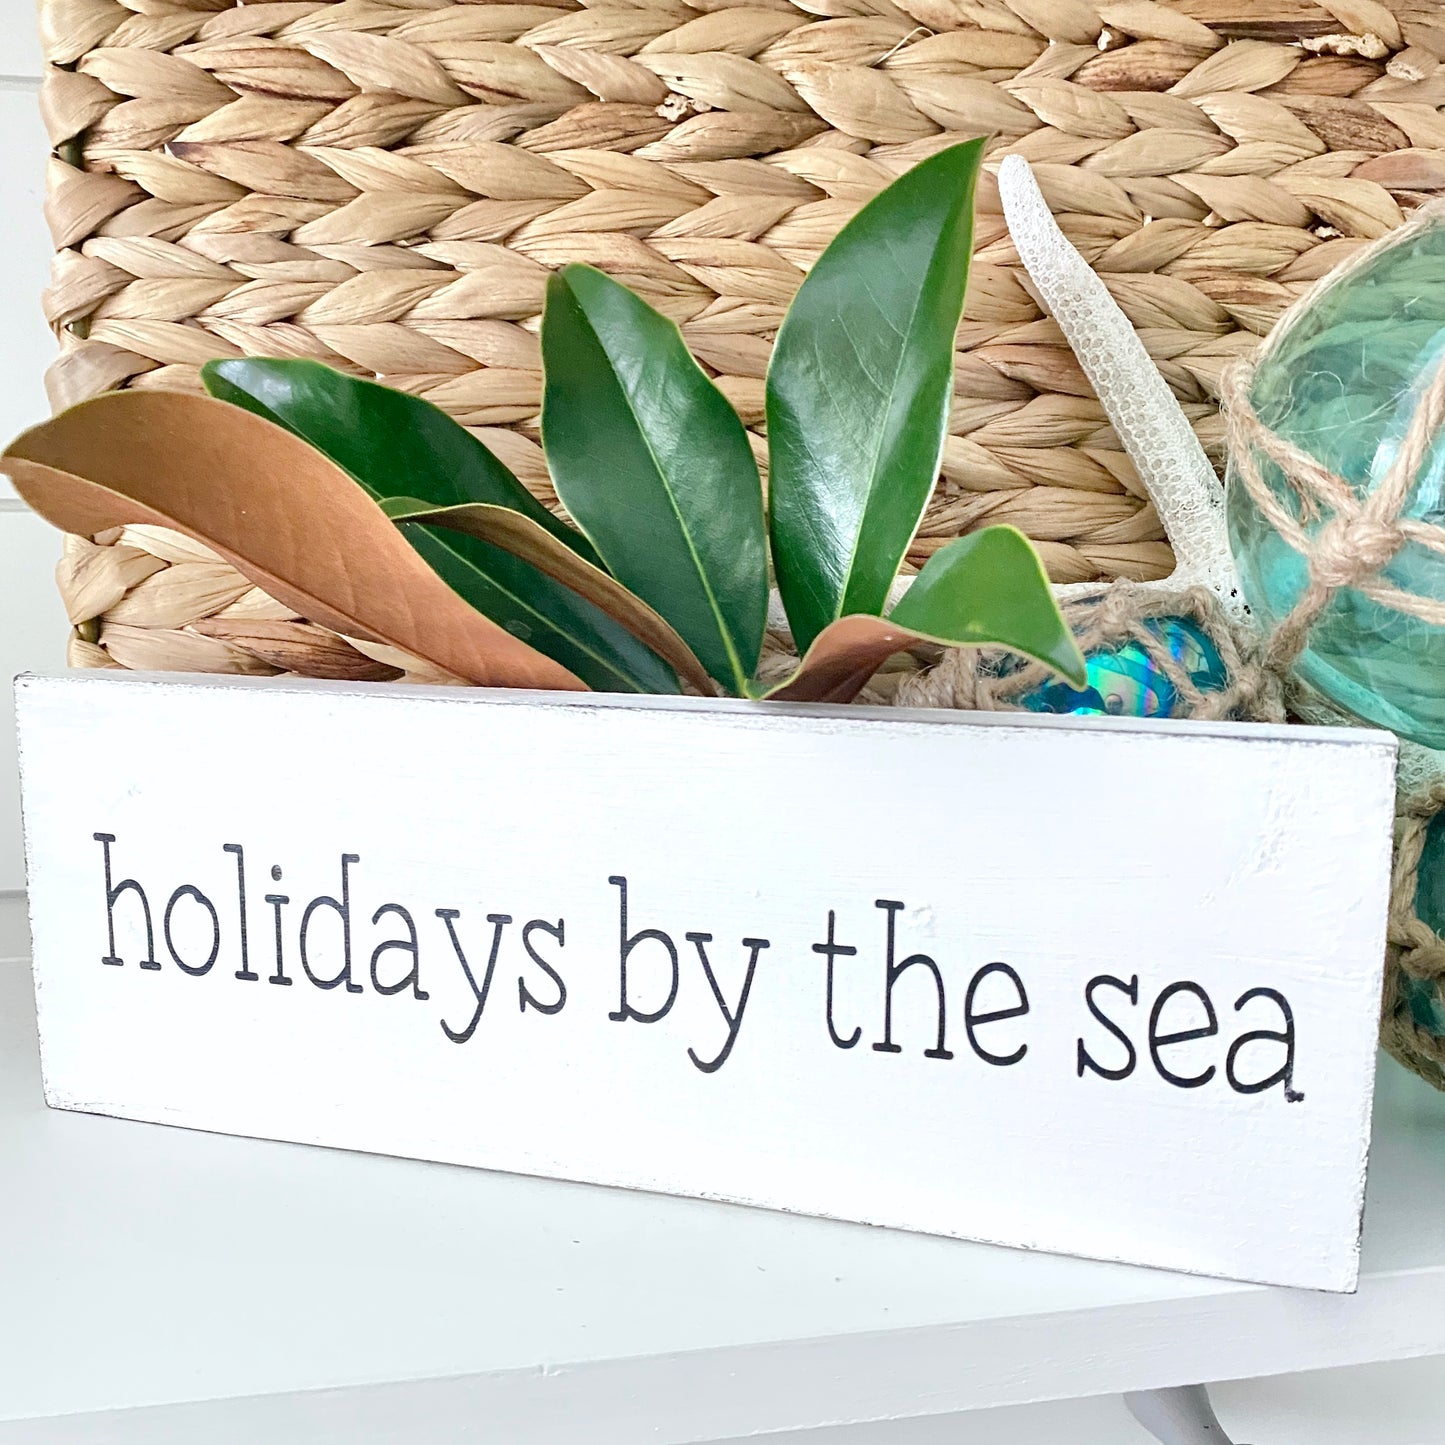 Holidays by the sea sign